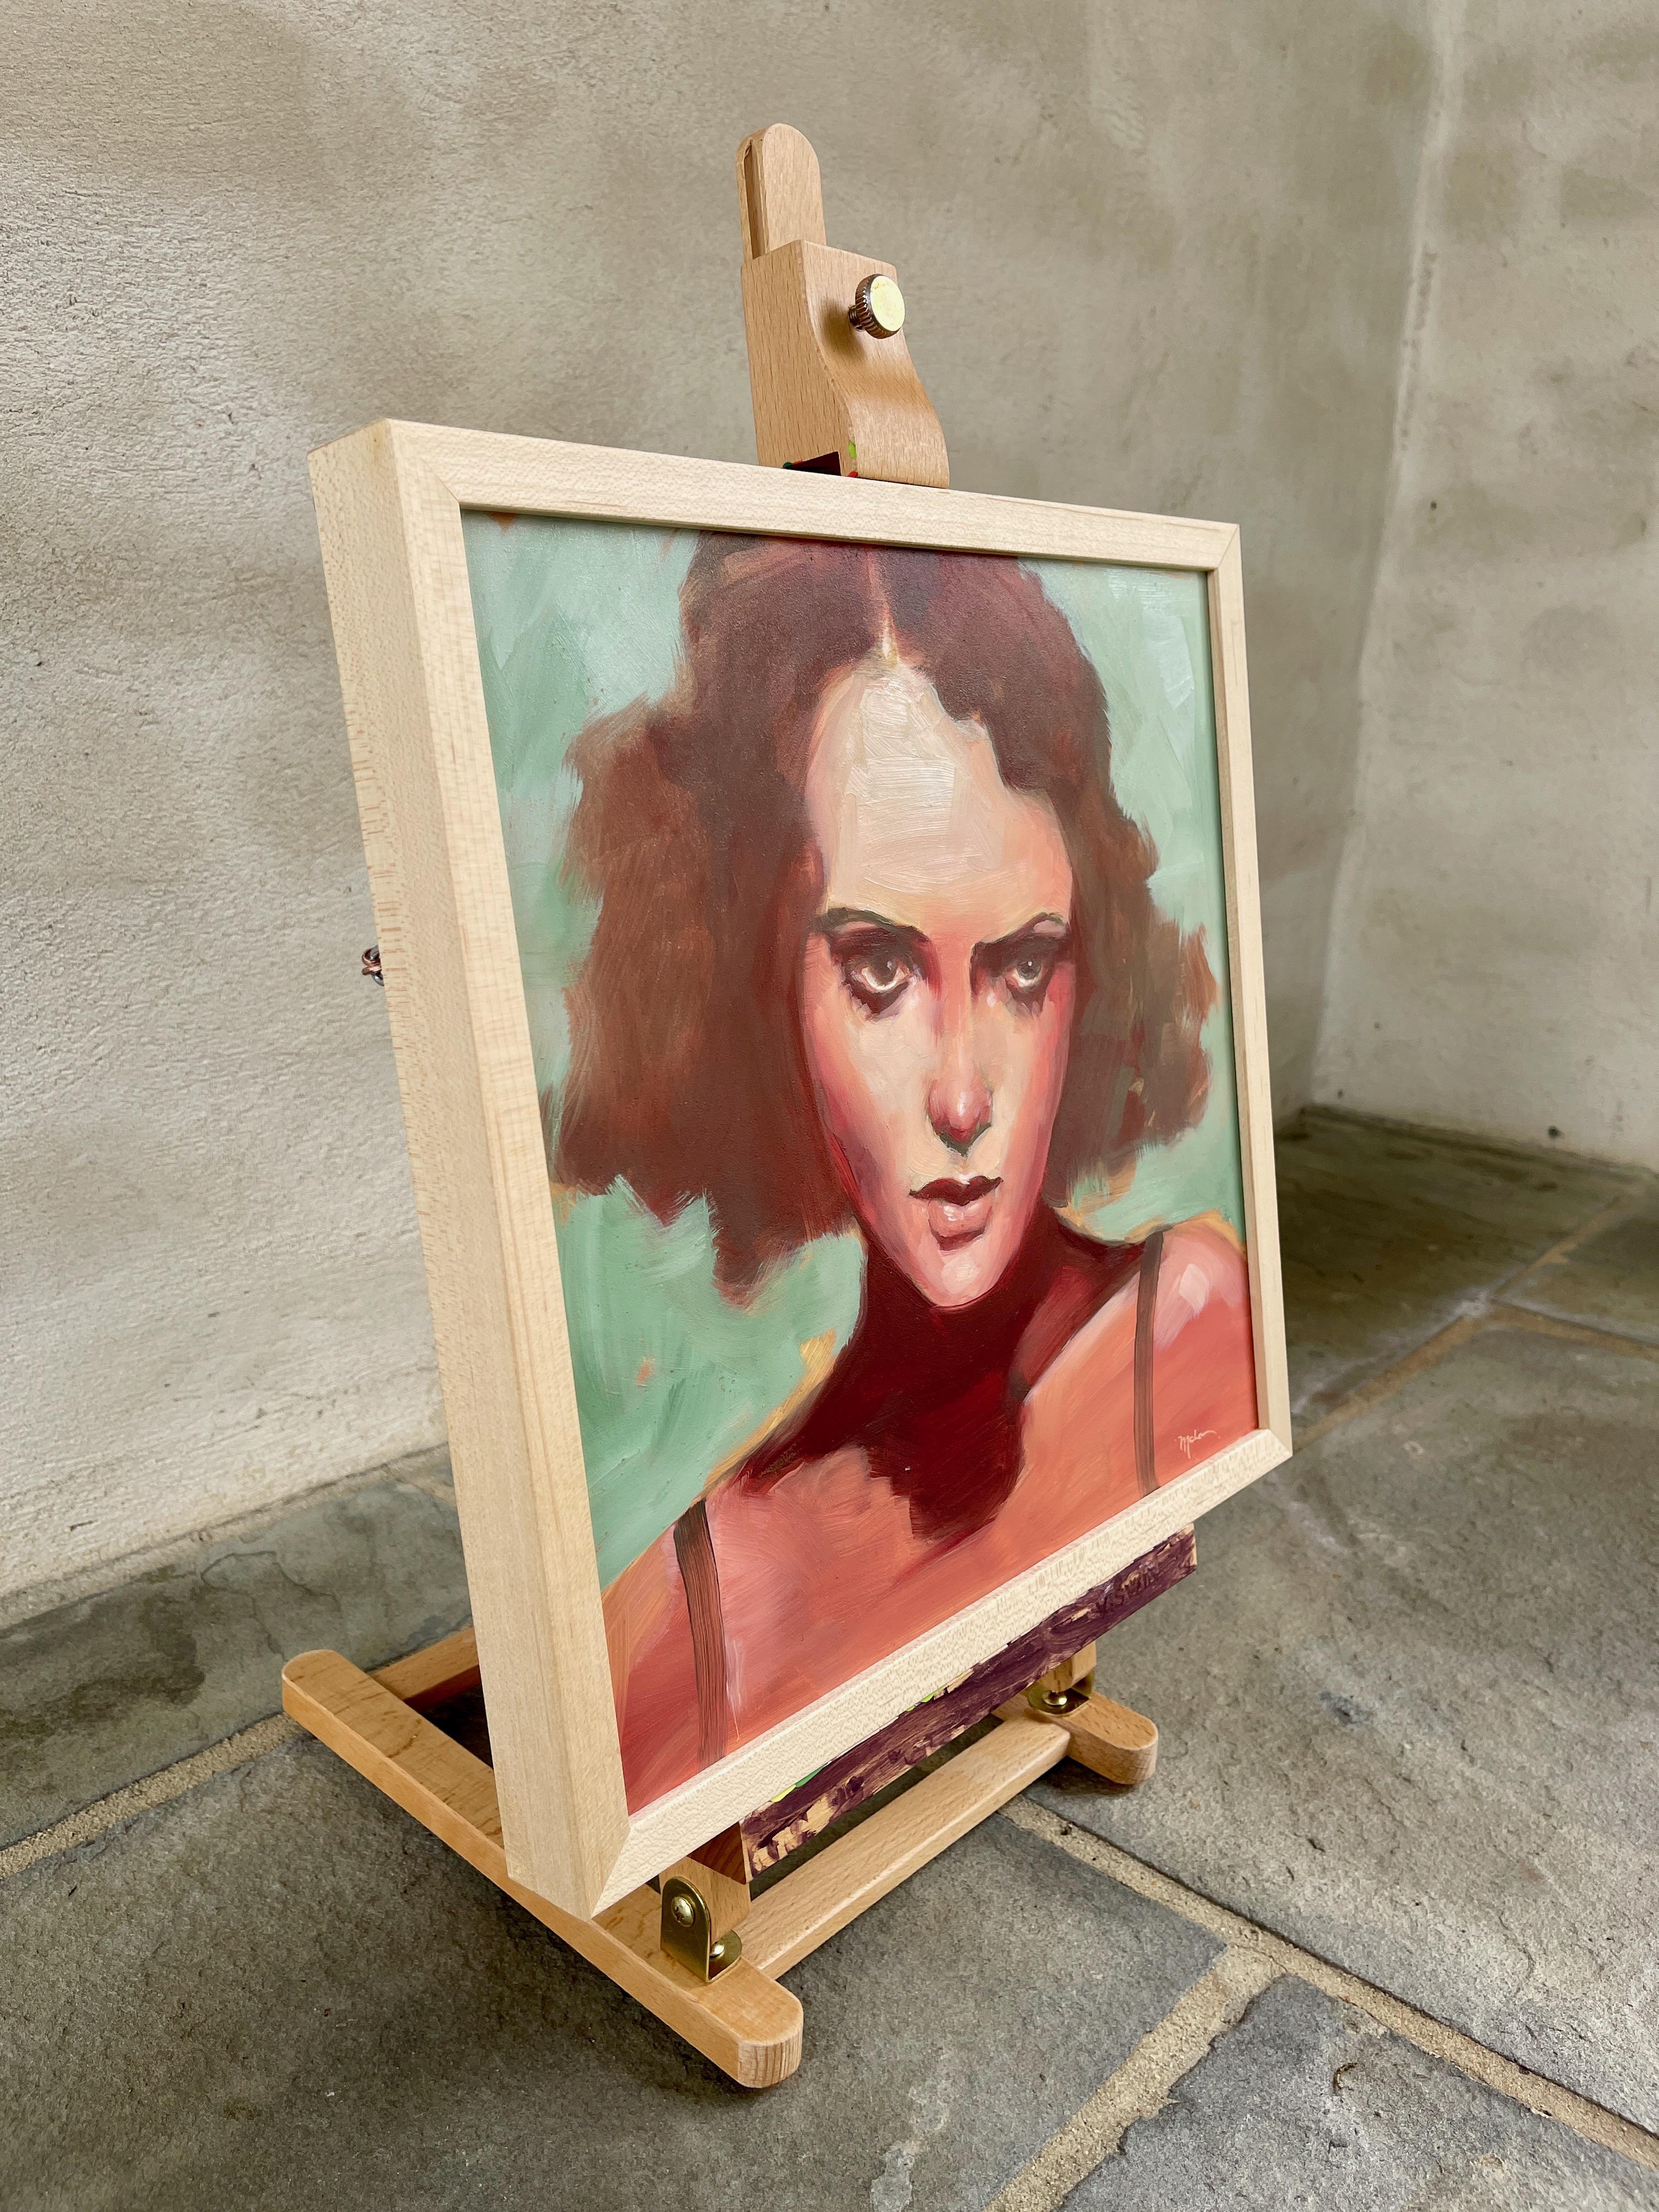 <p>Artist Comments<br>A woman wears a face of uncertainty, with slightly furrowed eyebrows and a contemplative gaze. Bold and powerful brushstrokes with vivid oil colors capture the intensity of her emotion. The portrait evokes a feeling of intrigue